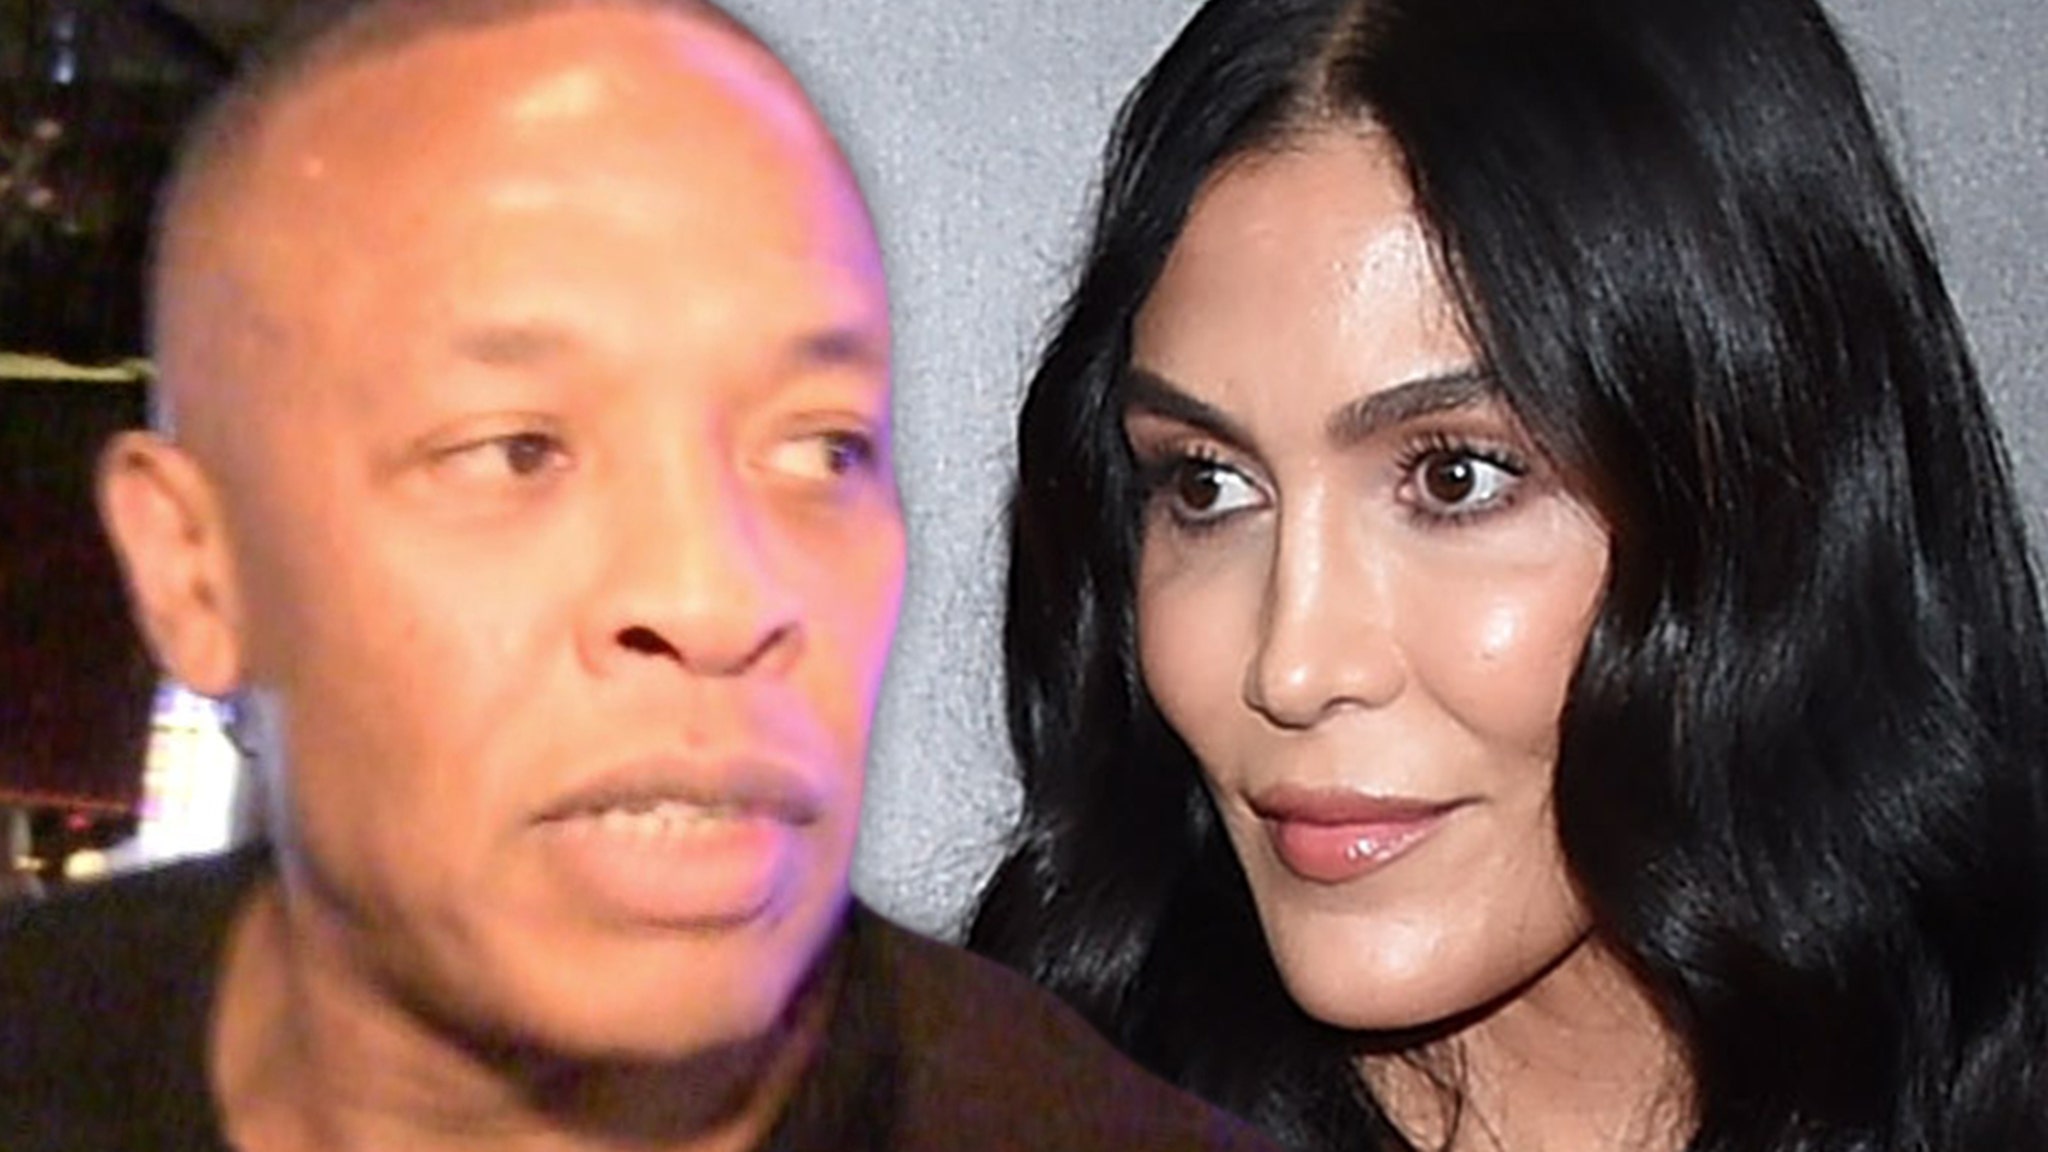 Dr. Dre’s estranged wife targets alleged lovers because of money